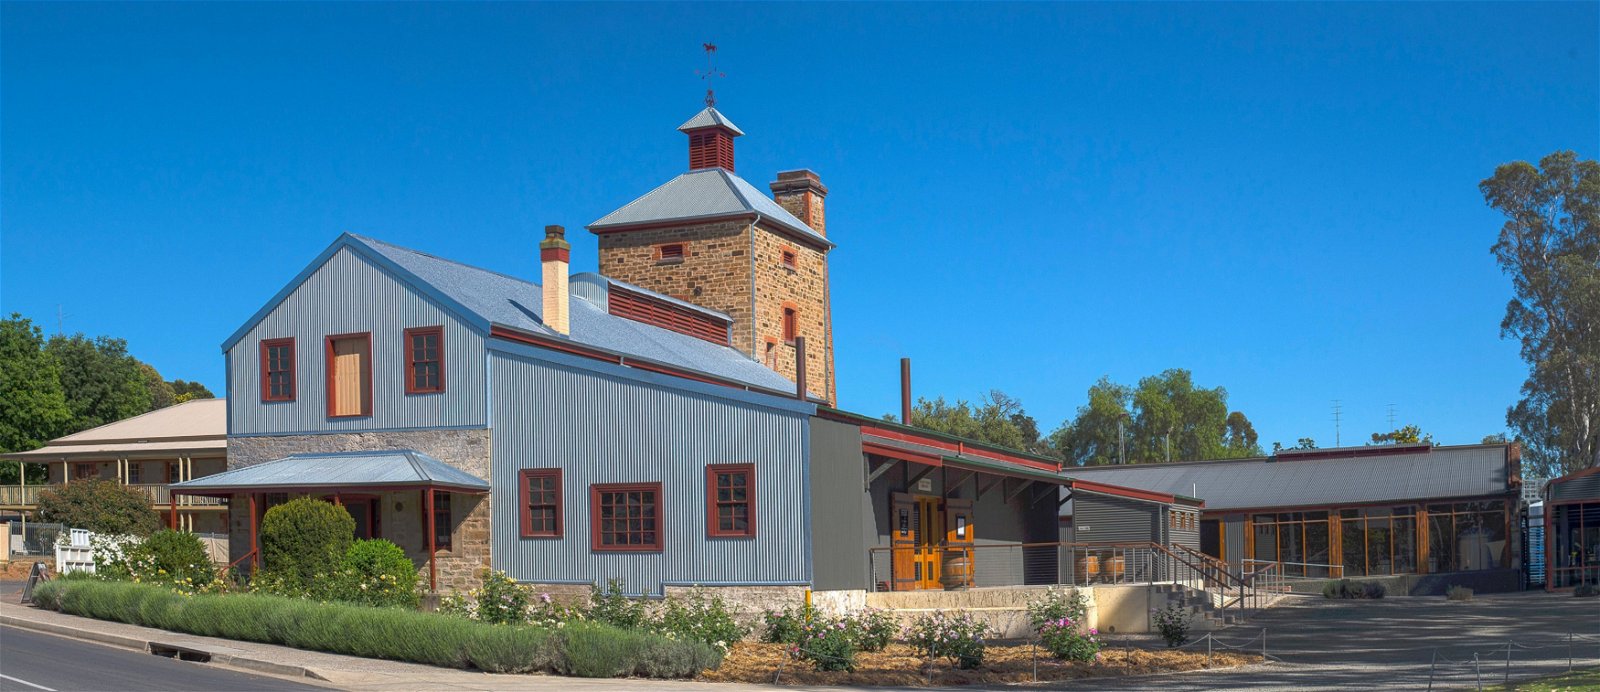 Knappstein Enterprise Winery - Northern Rivers Accommodation